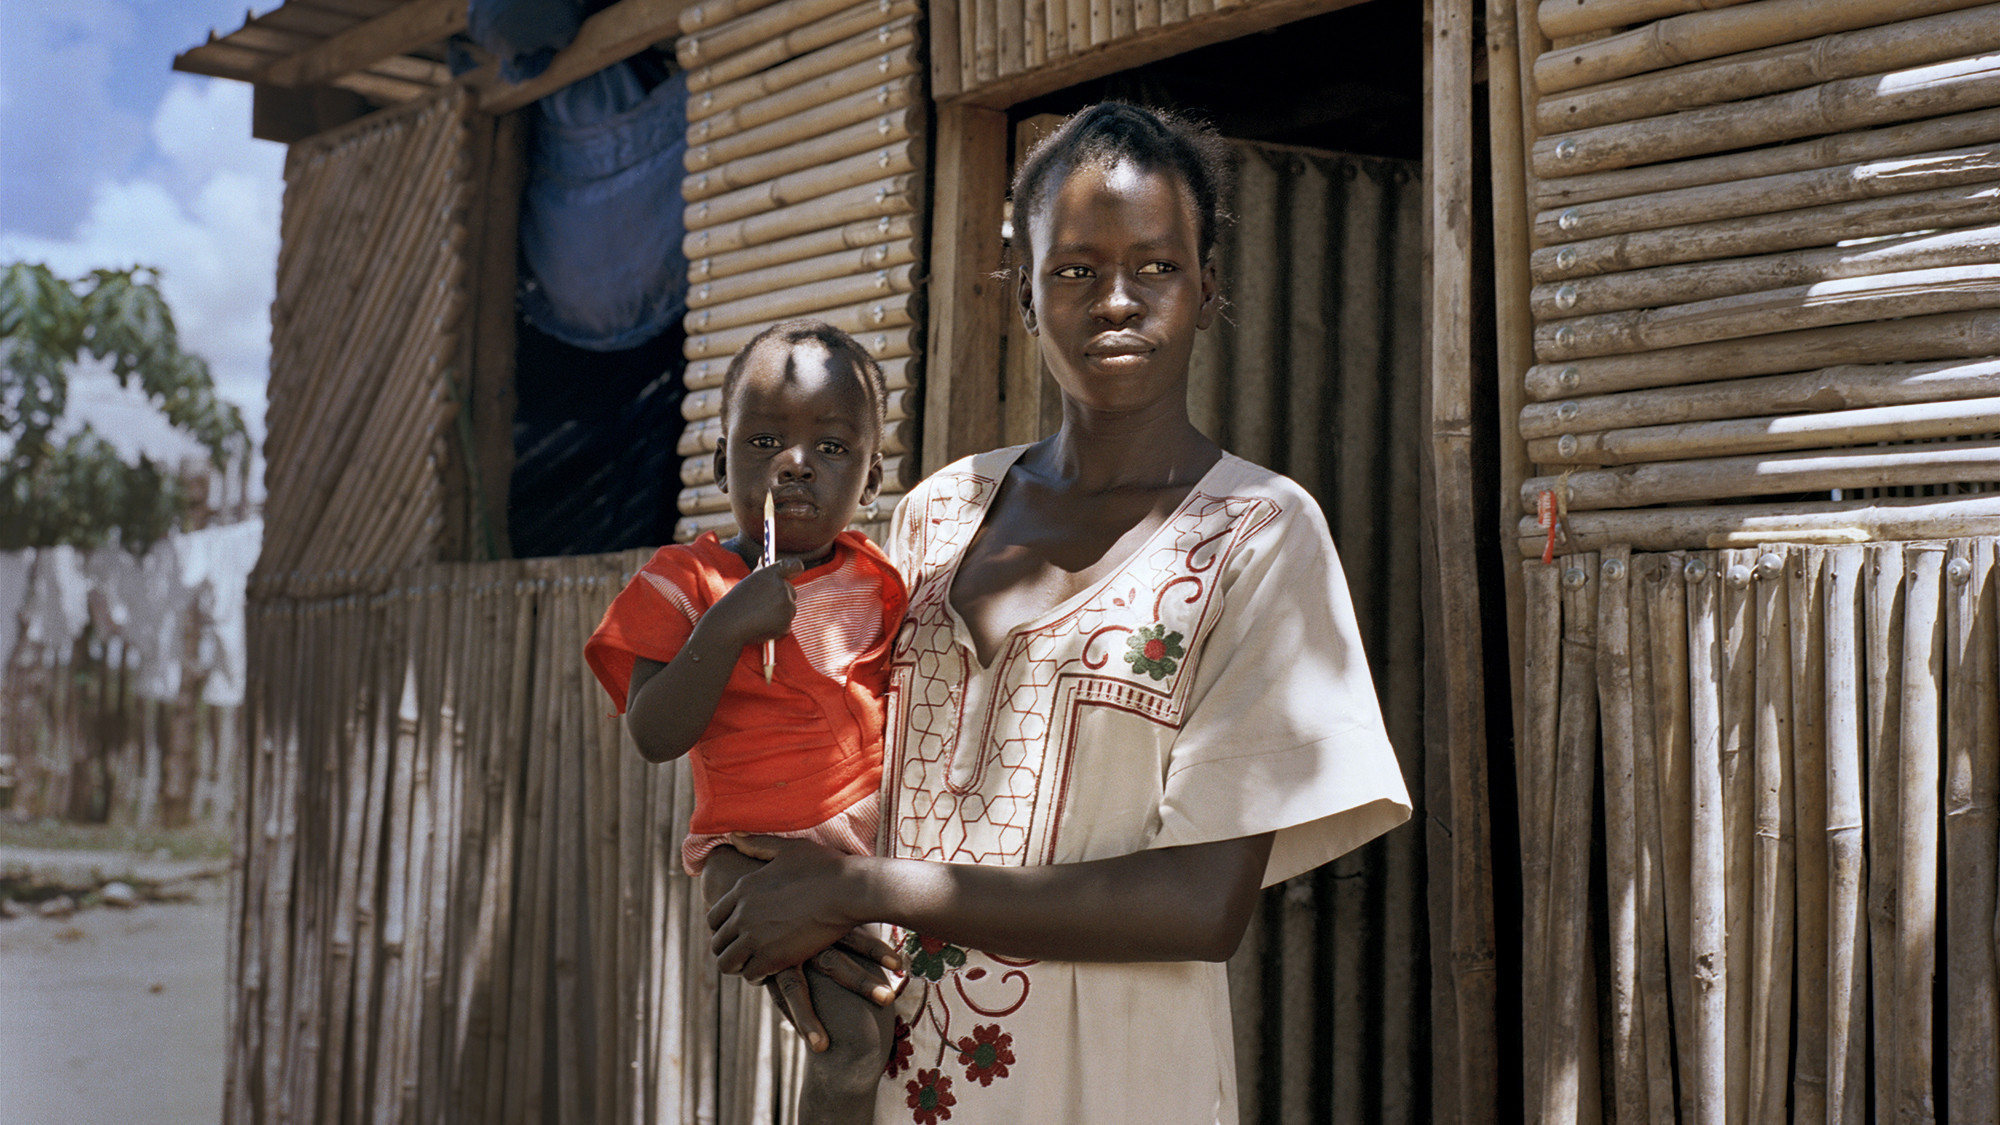 Child brides sold for cows: The price of being a girl in South Sudan ...